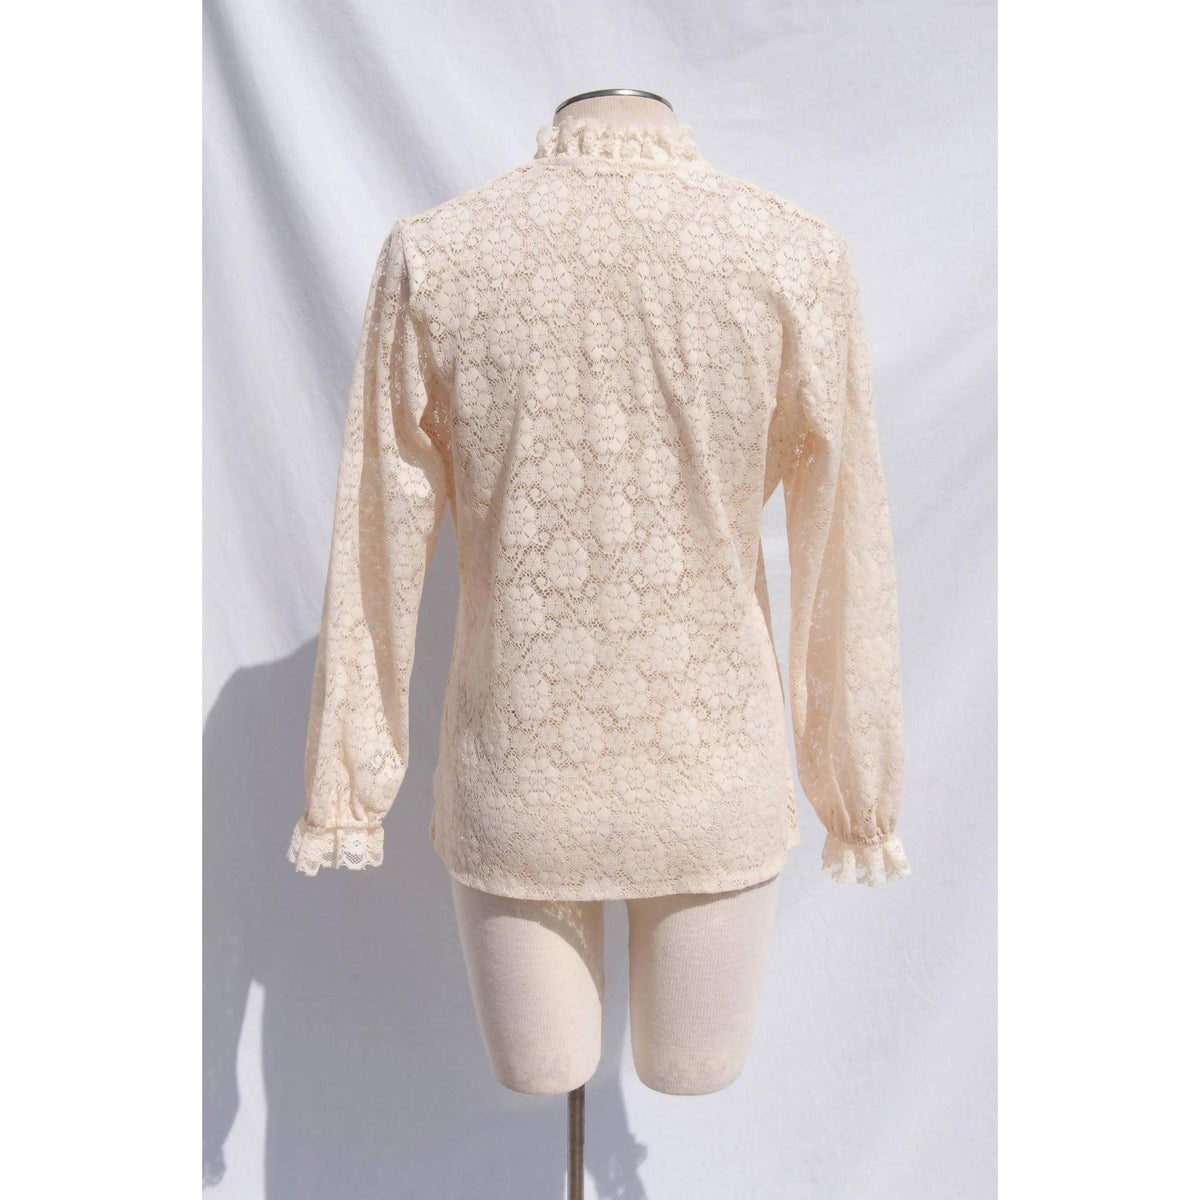 CAREFREE FASHIONS Lace Cream Floral Top | Size M/L - theREMODA